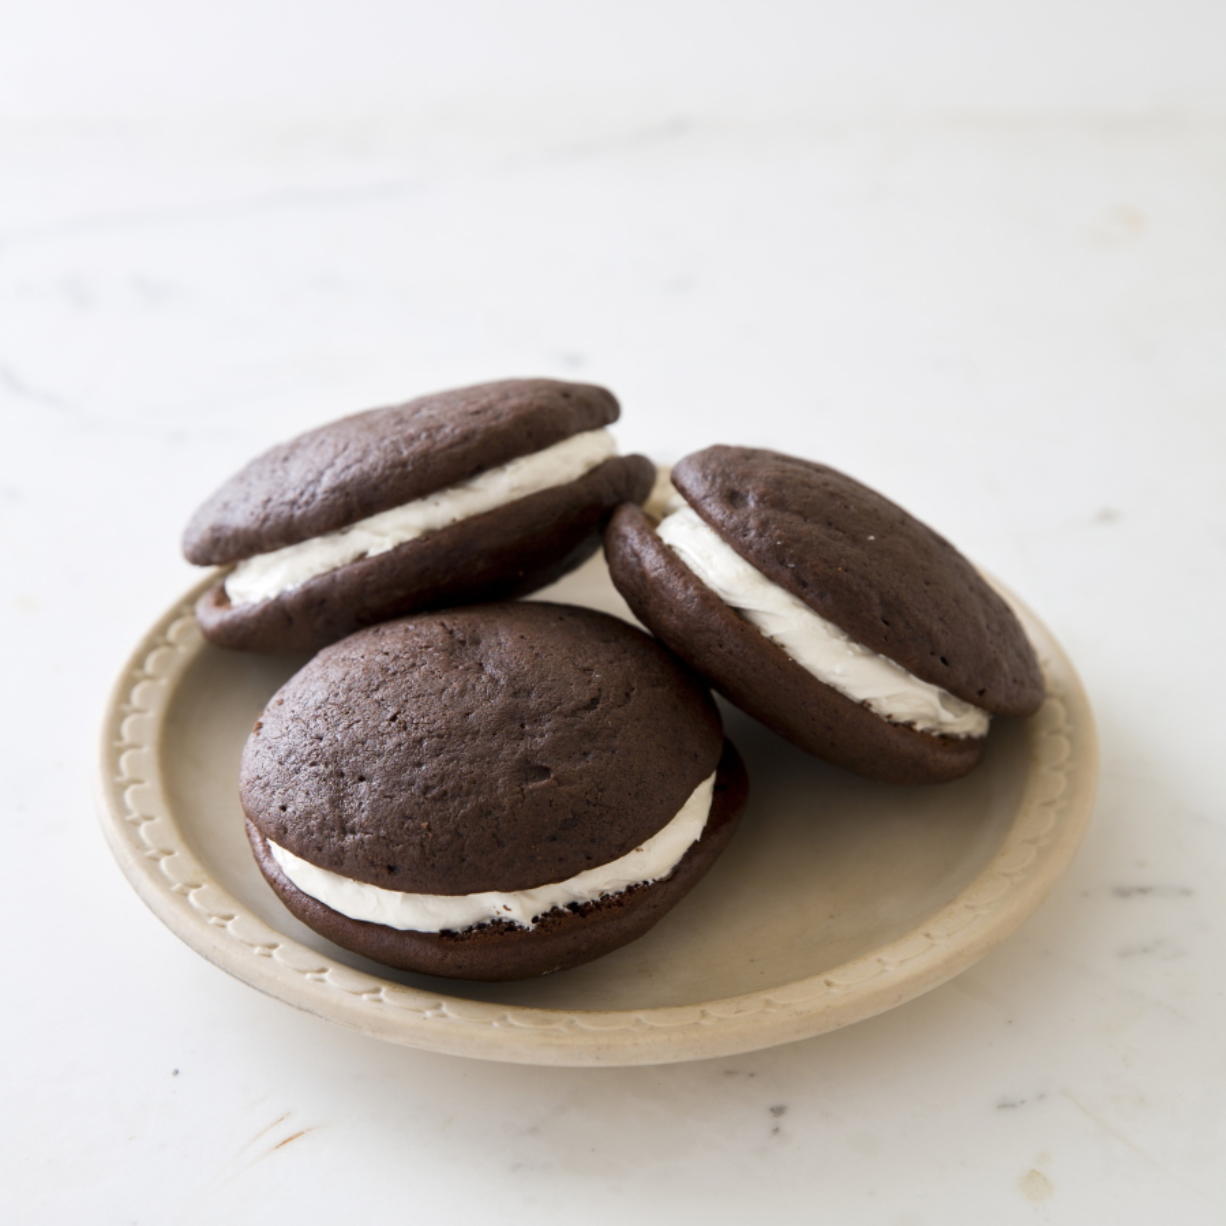 What the secret to making great whoopie pies? Brown sugar - The Columbian